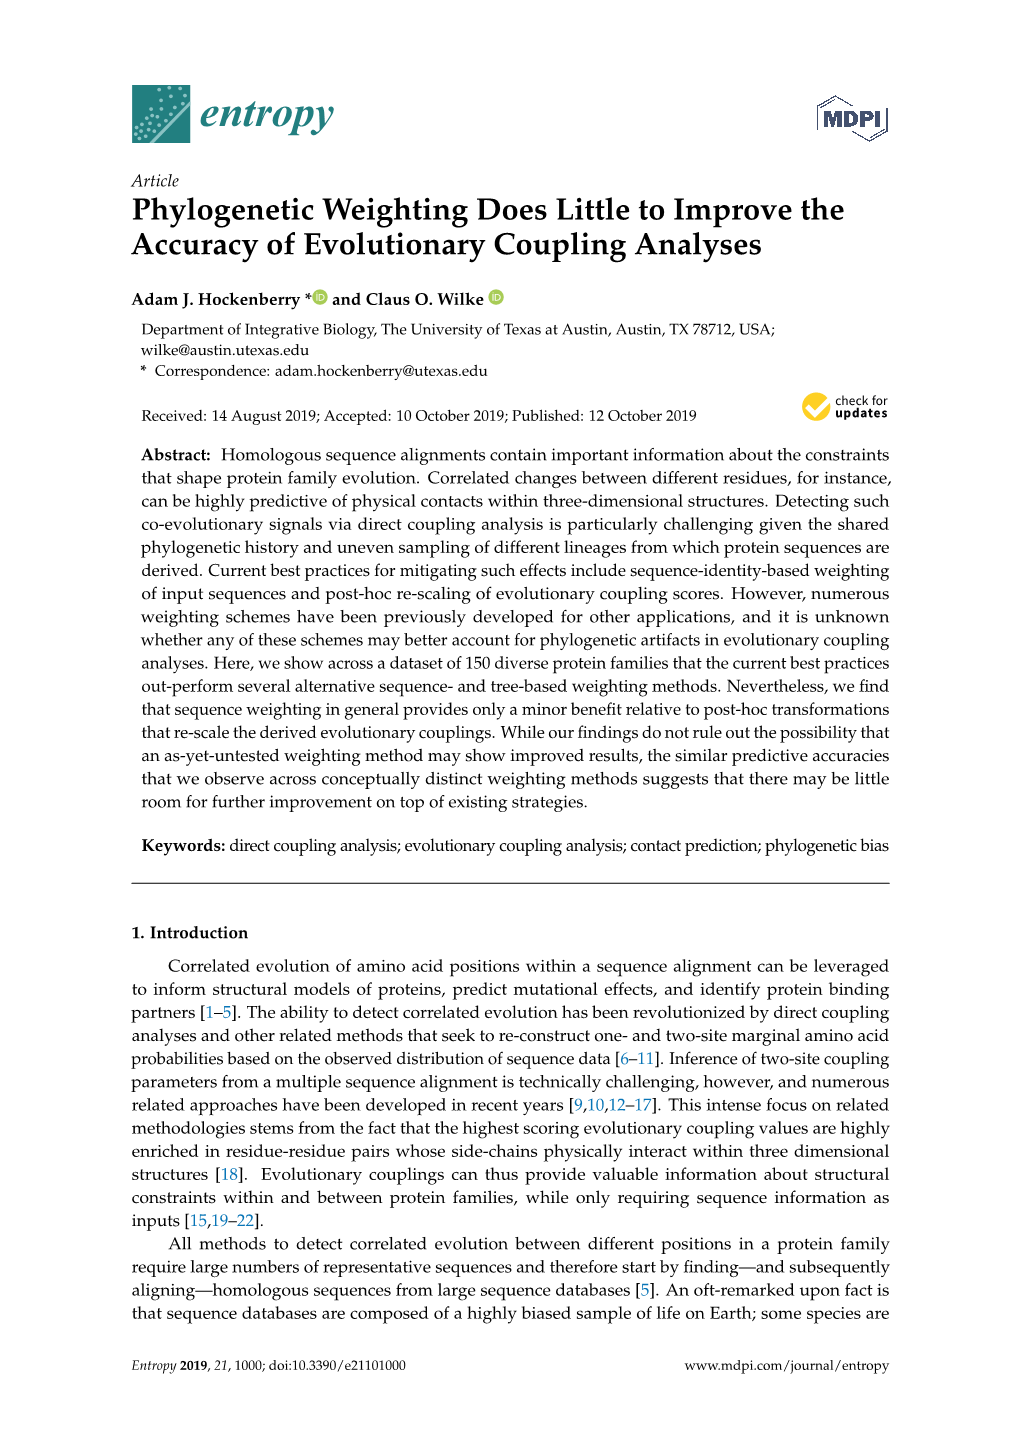 Phylogenetic Weighting Does Little to Improve the Accuracy of Evolutionary Coupling Analyses